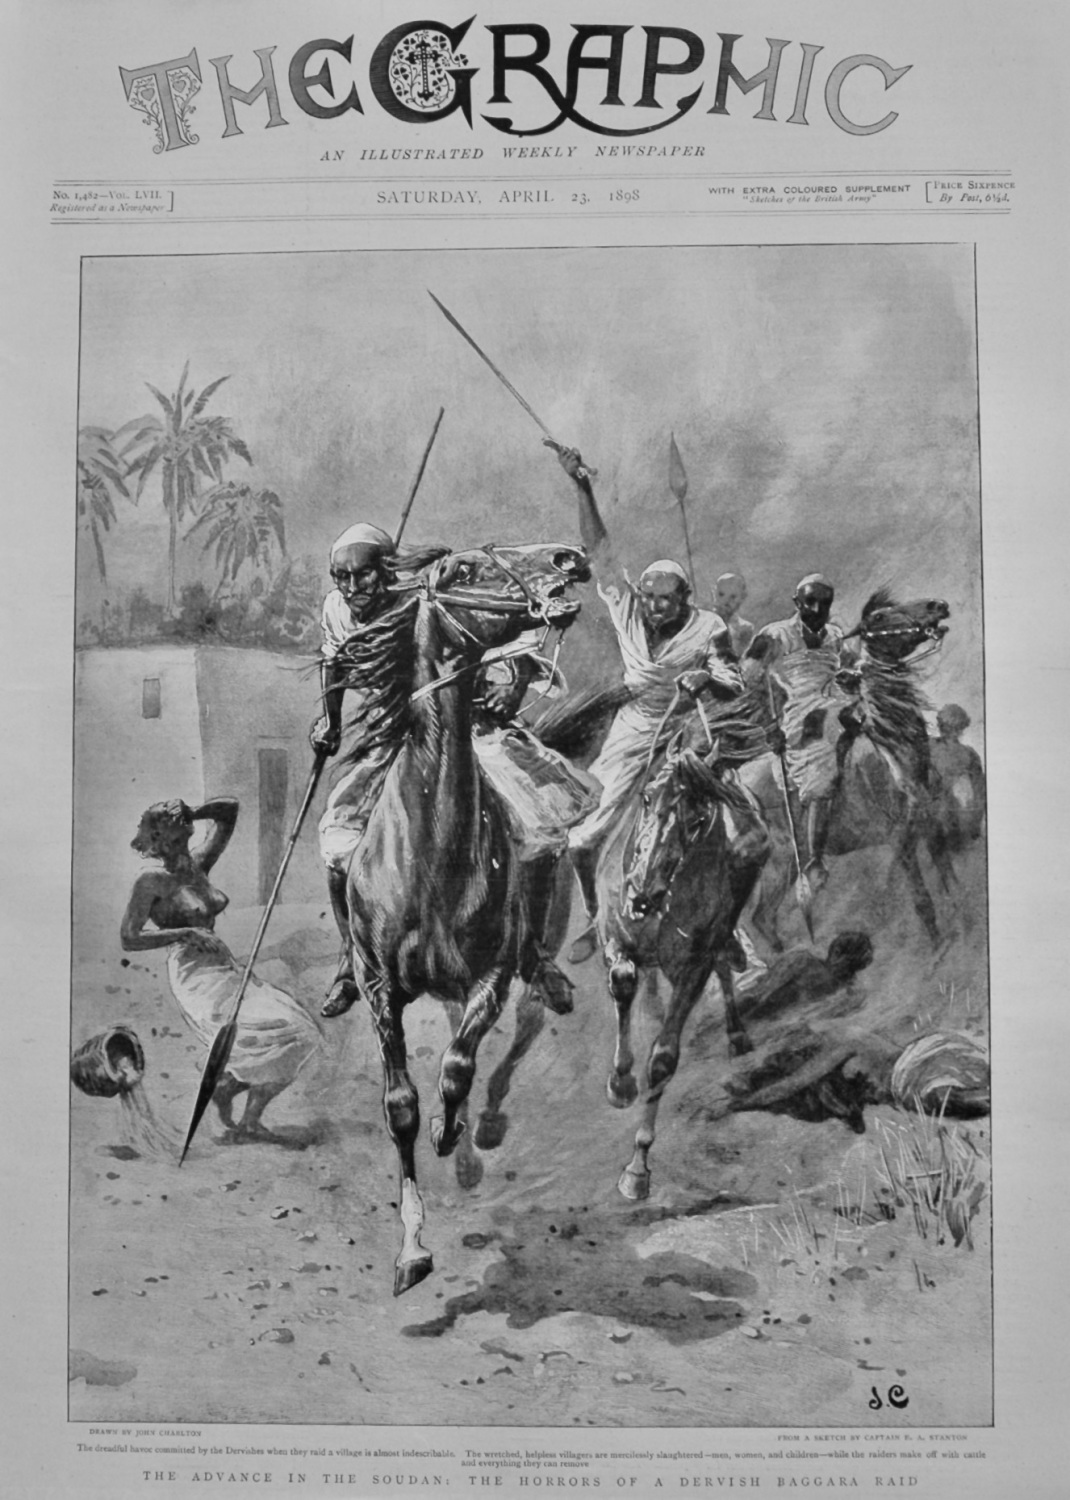 The Advance in the Sudan : The Horrors of a Dervish Baggara Raid.  1898.